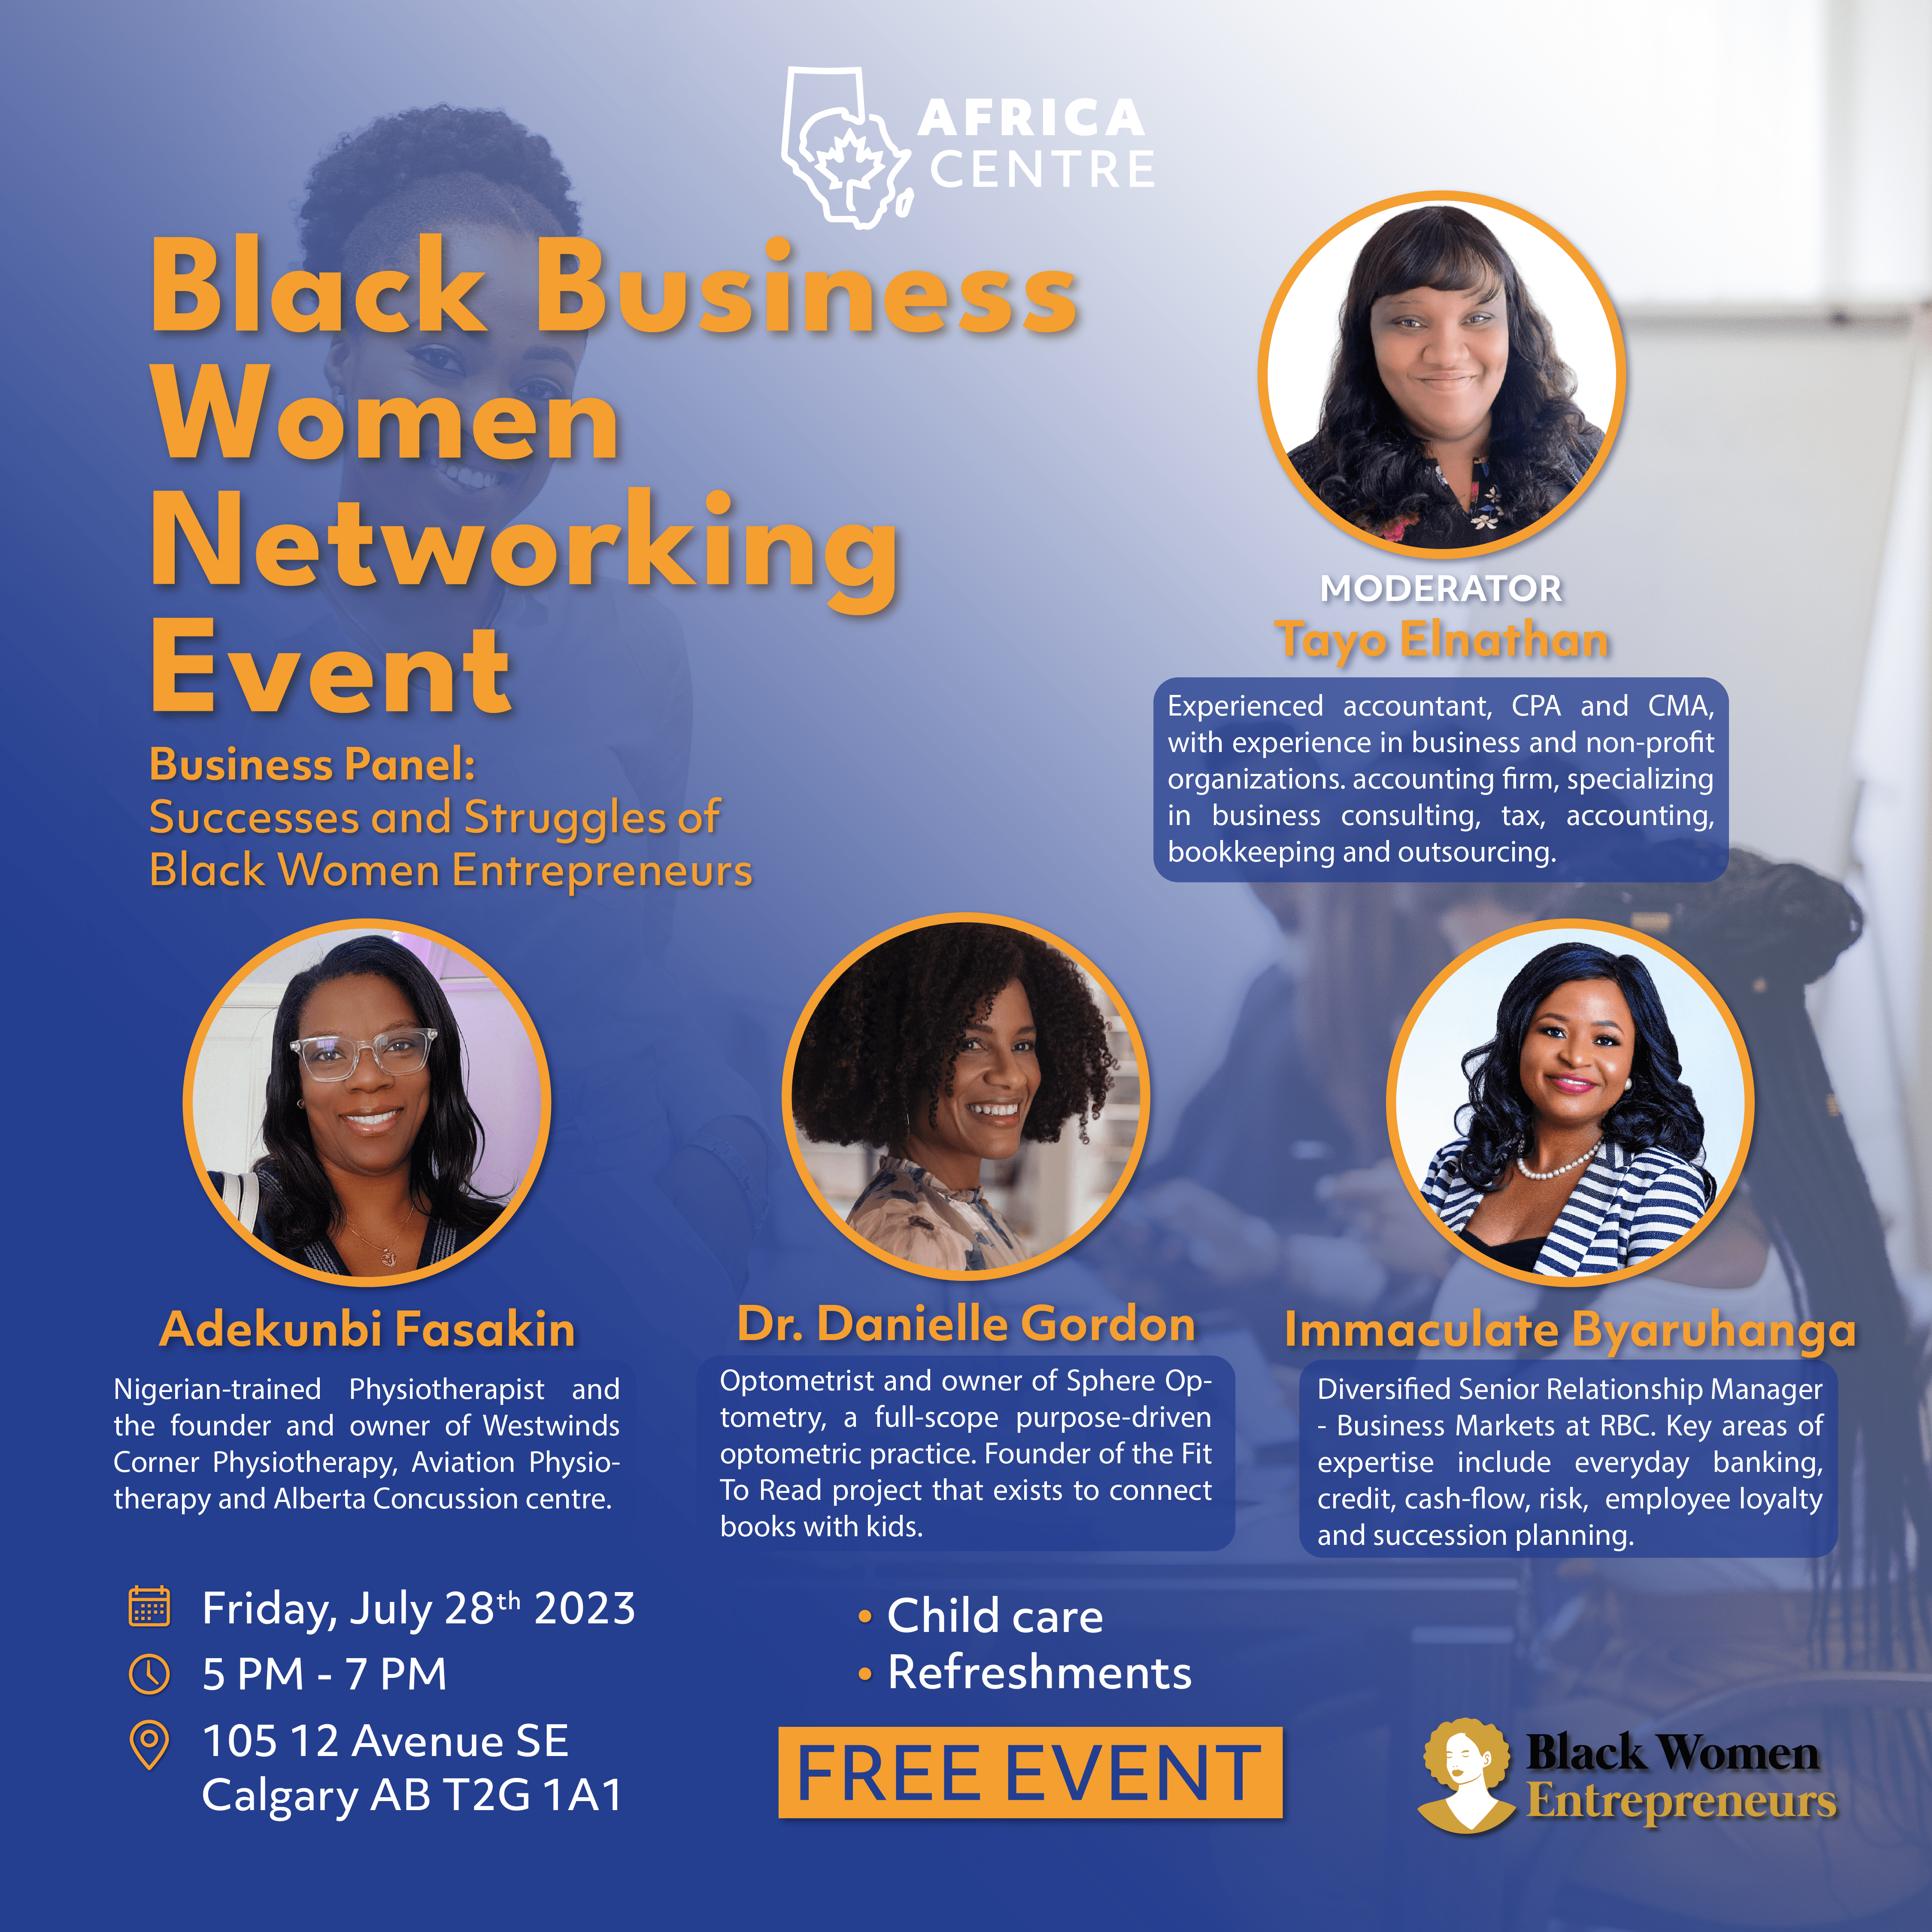 Black Business Women Networking Event | July 28th | 5 pm - 7 pm